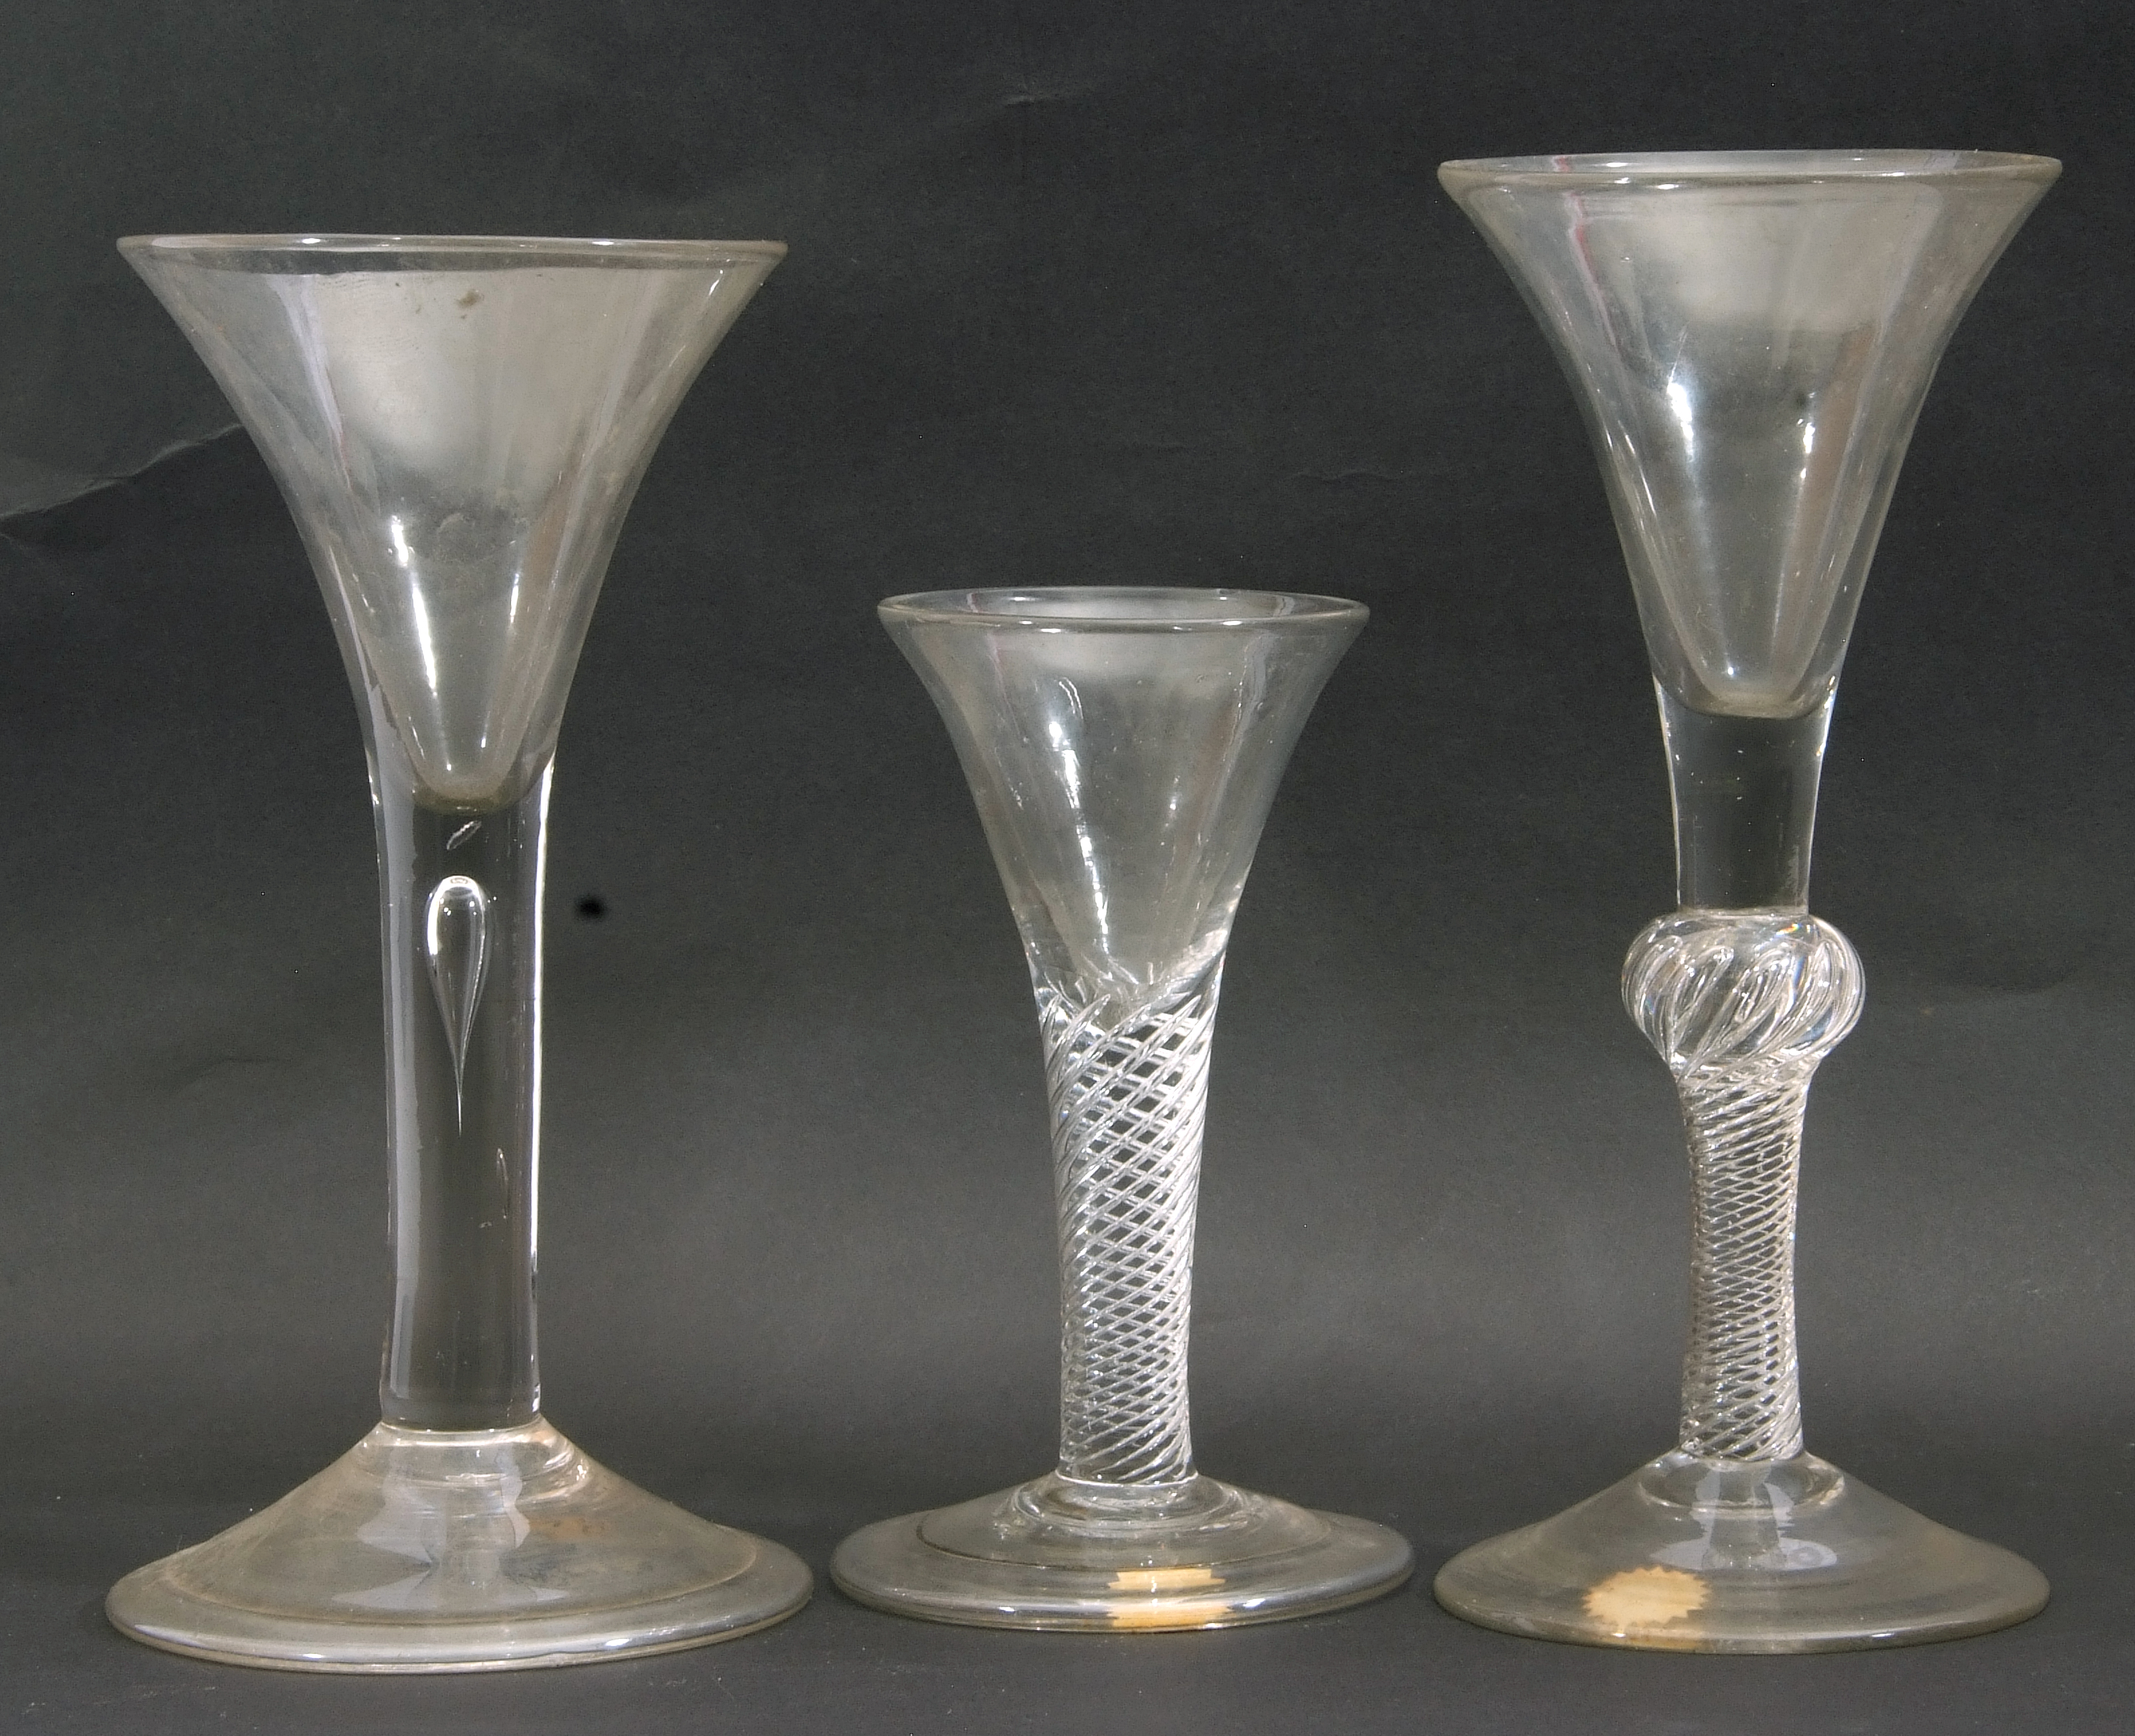 Group of 2 mid 18th century wine glasses, one air twist with knop and second with small teardrop - Image 2 of 2